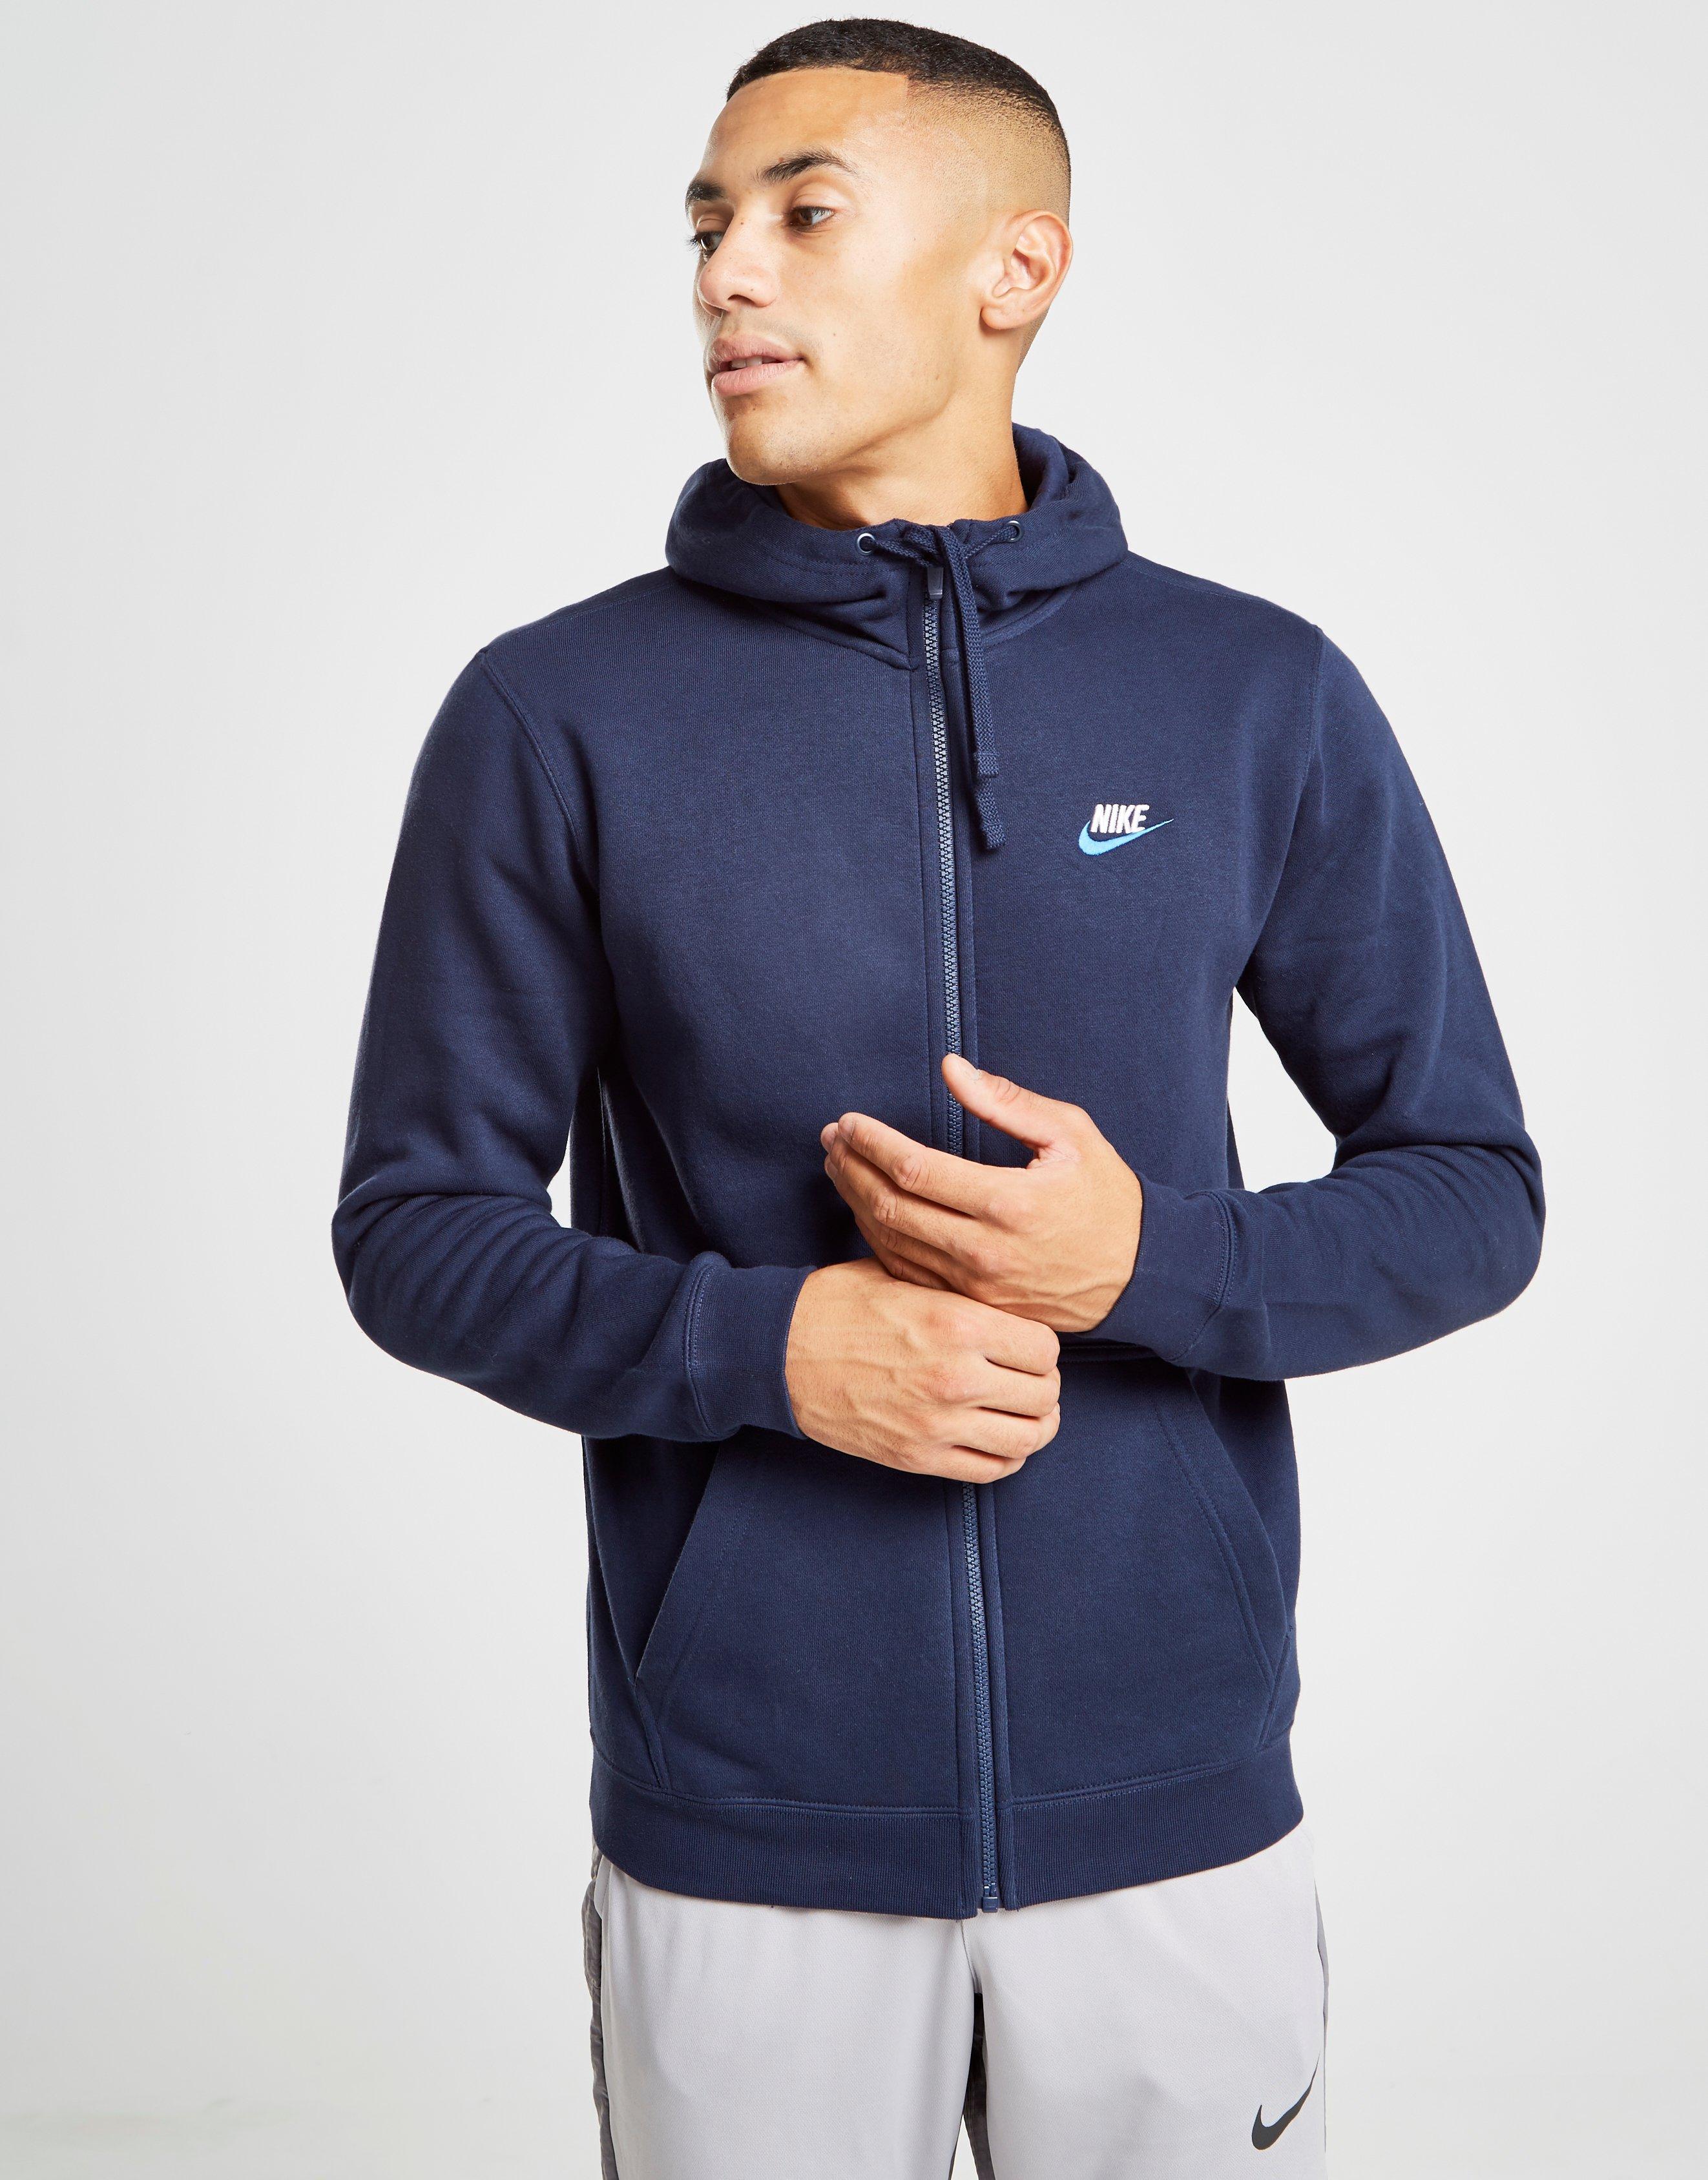 Nike Cotton Foundation Full Zip Hoodie in Navy (Blue) for Men - Lyst